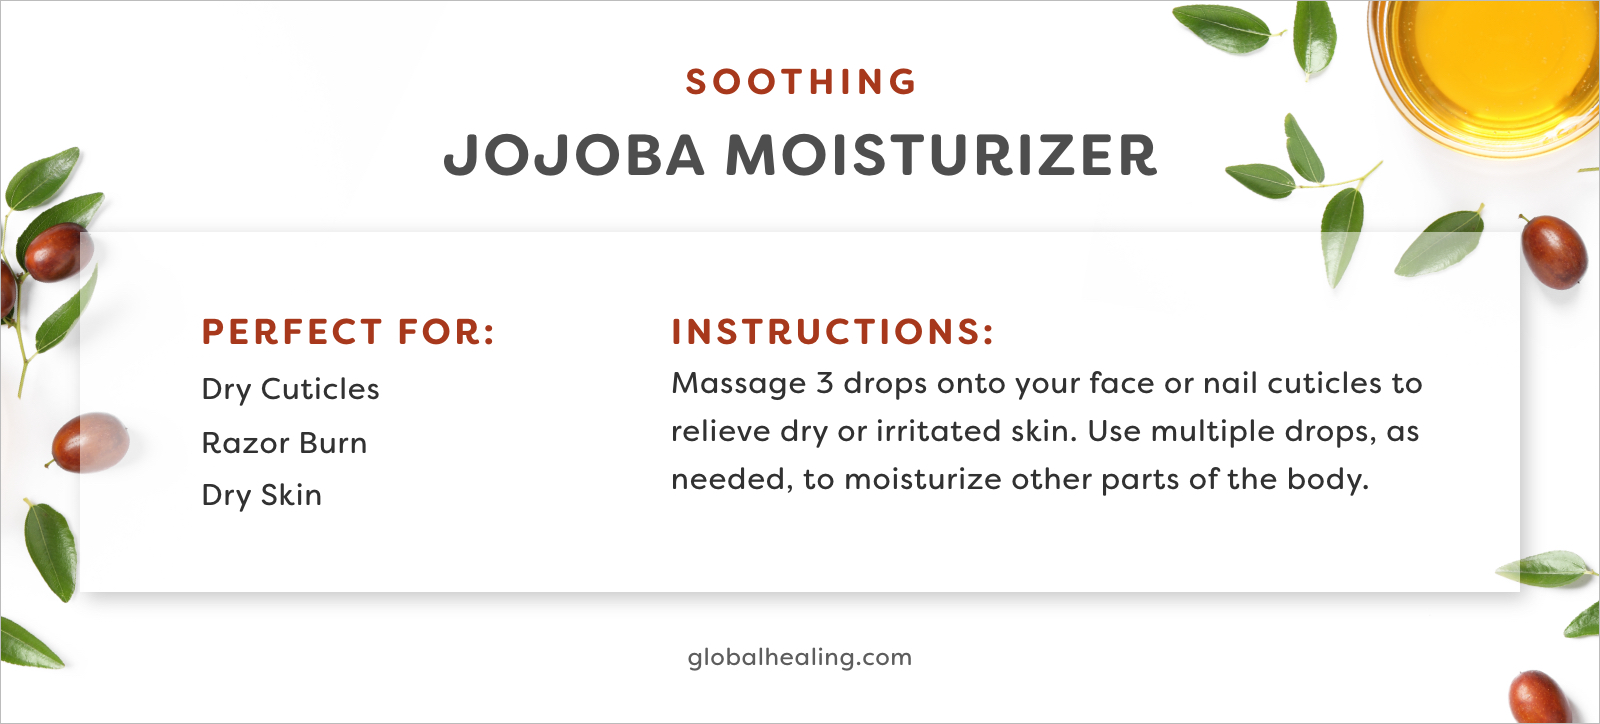 Try this soothing jojoba moisturizer that'll transform your skin.